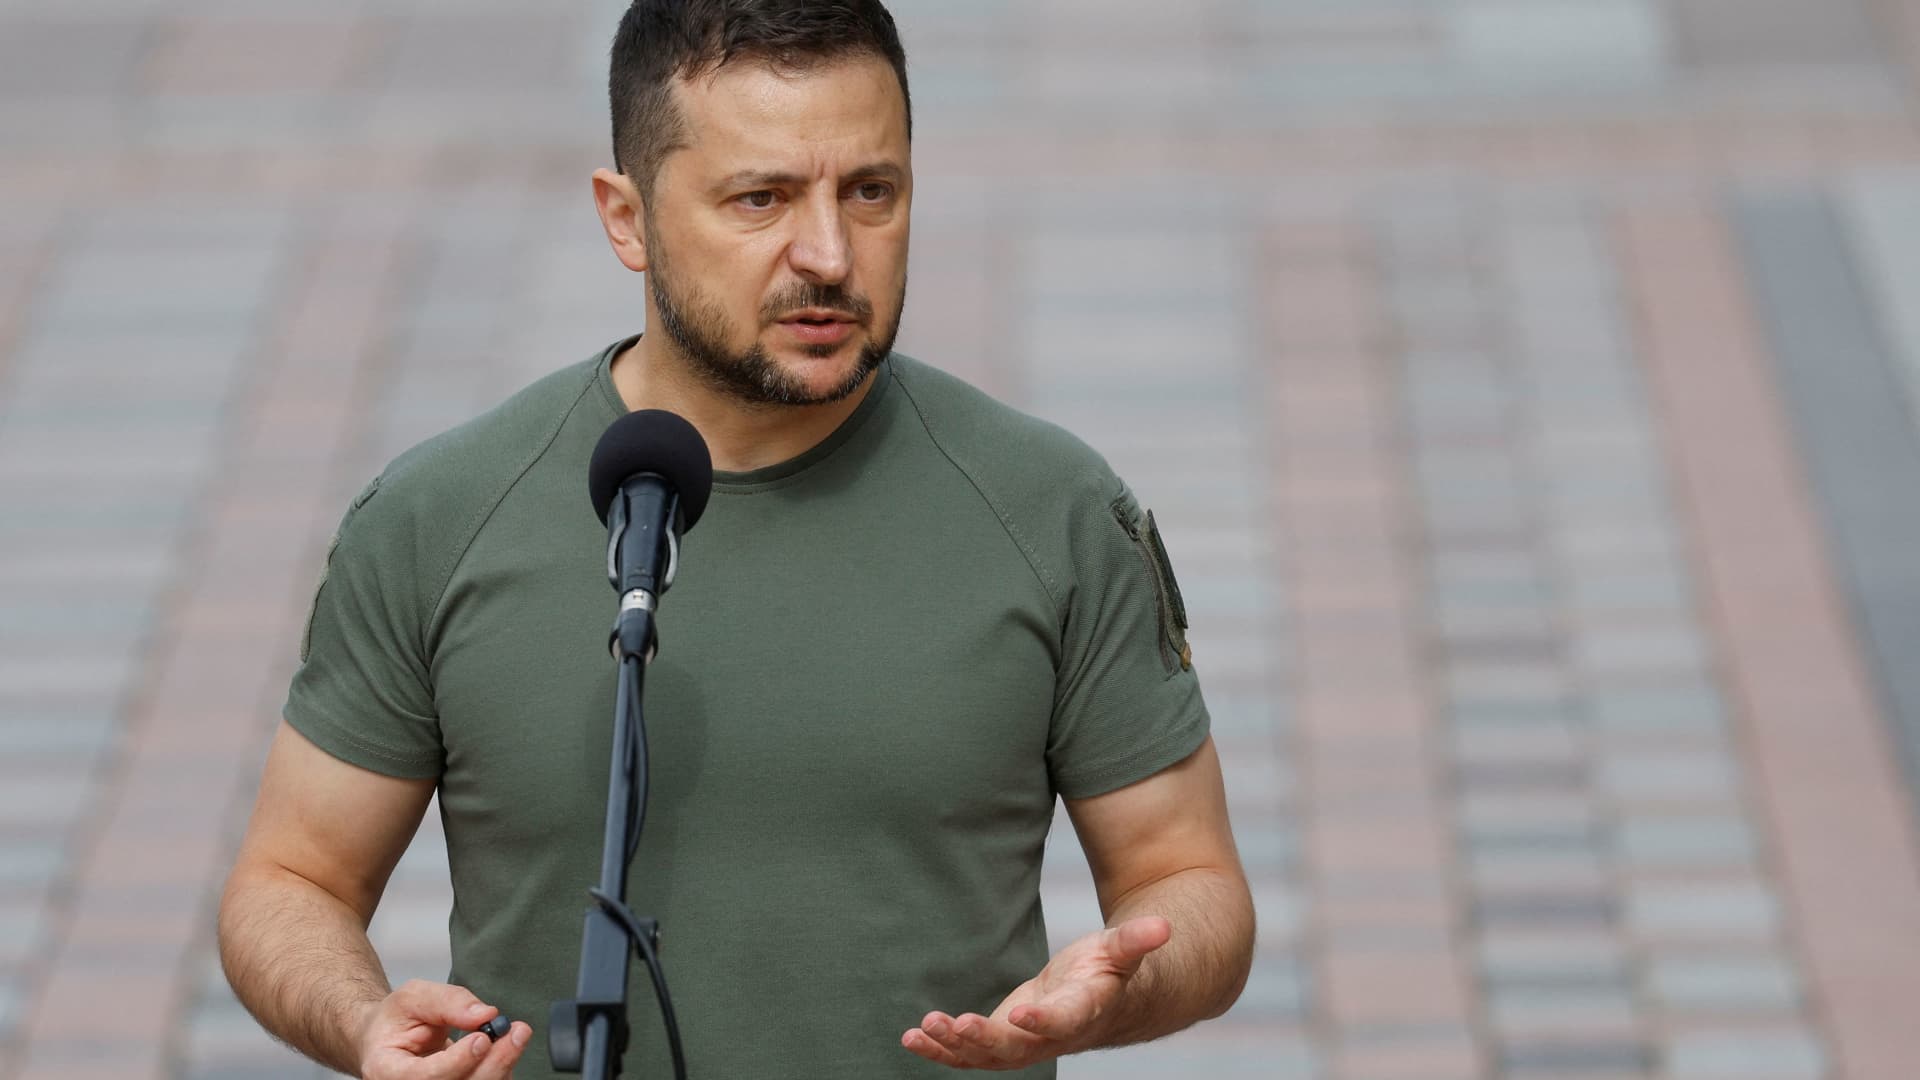 Zelenskyy on Putin's threat of nuclear weapons: 'I don't think he's bluffing'